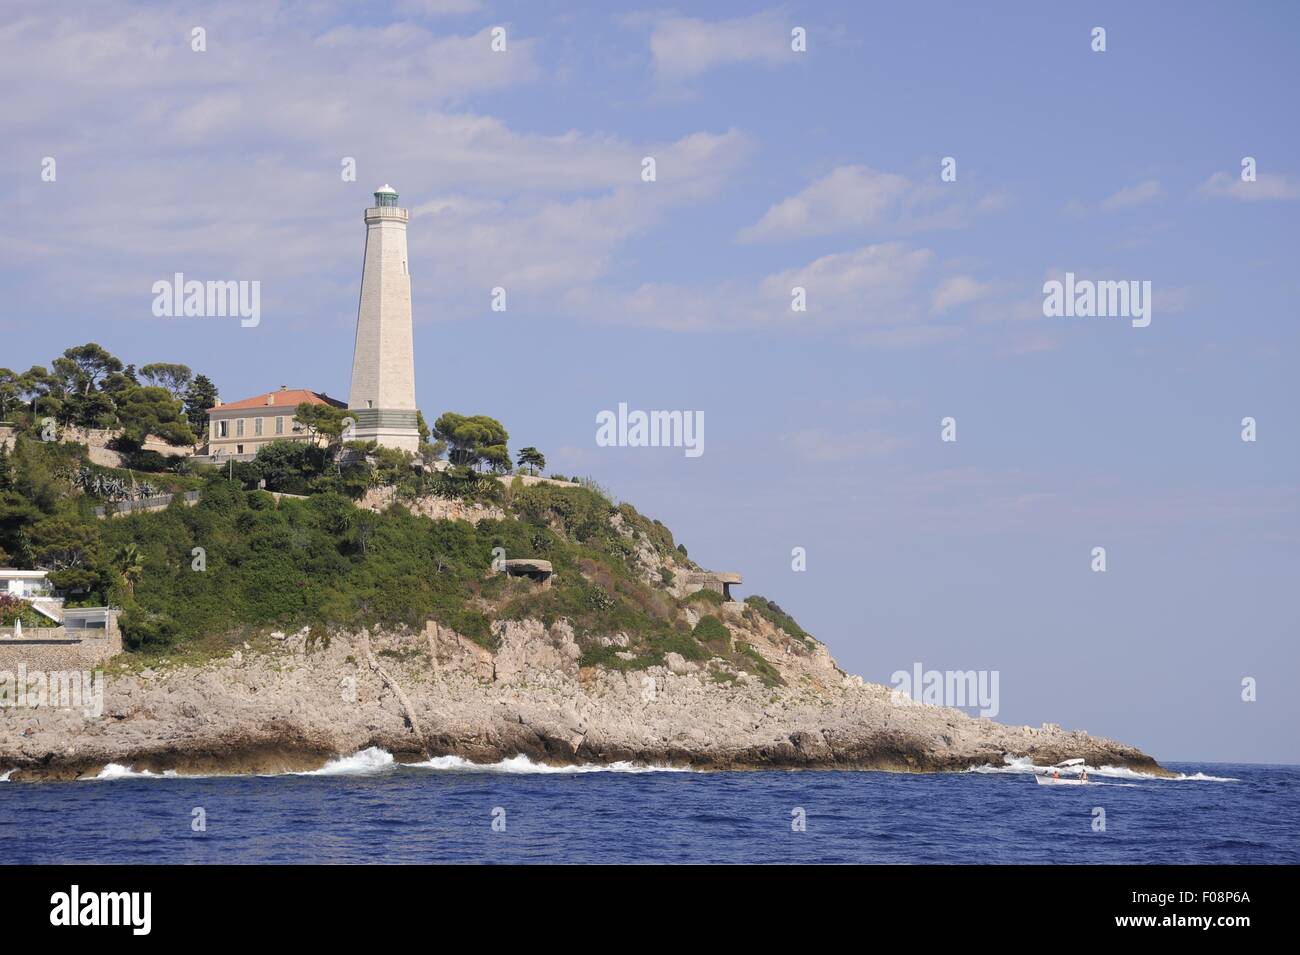 France, French Riviera, the Cap Ferrat lighthouse Stock Photo